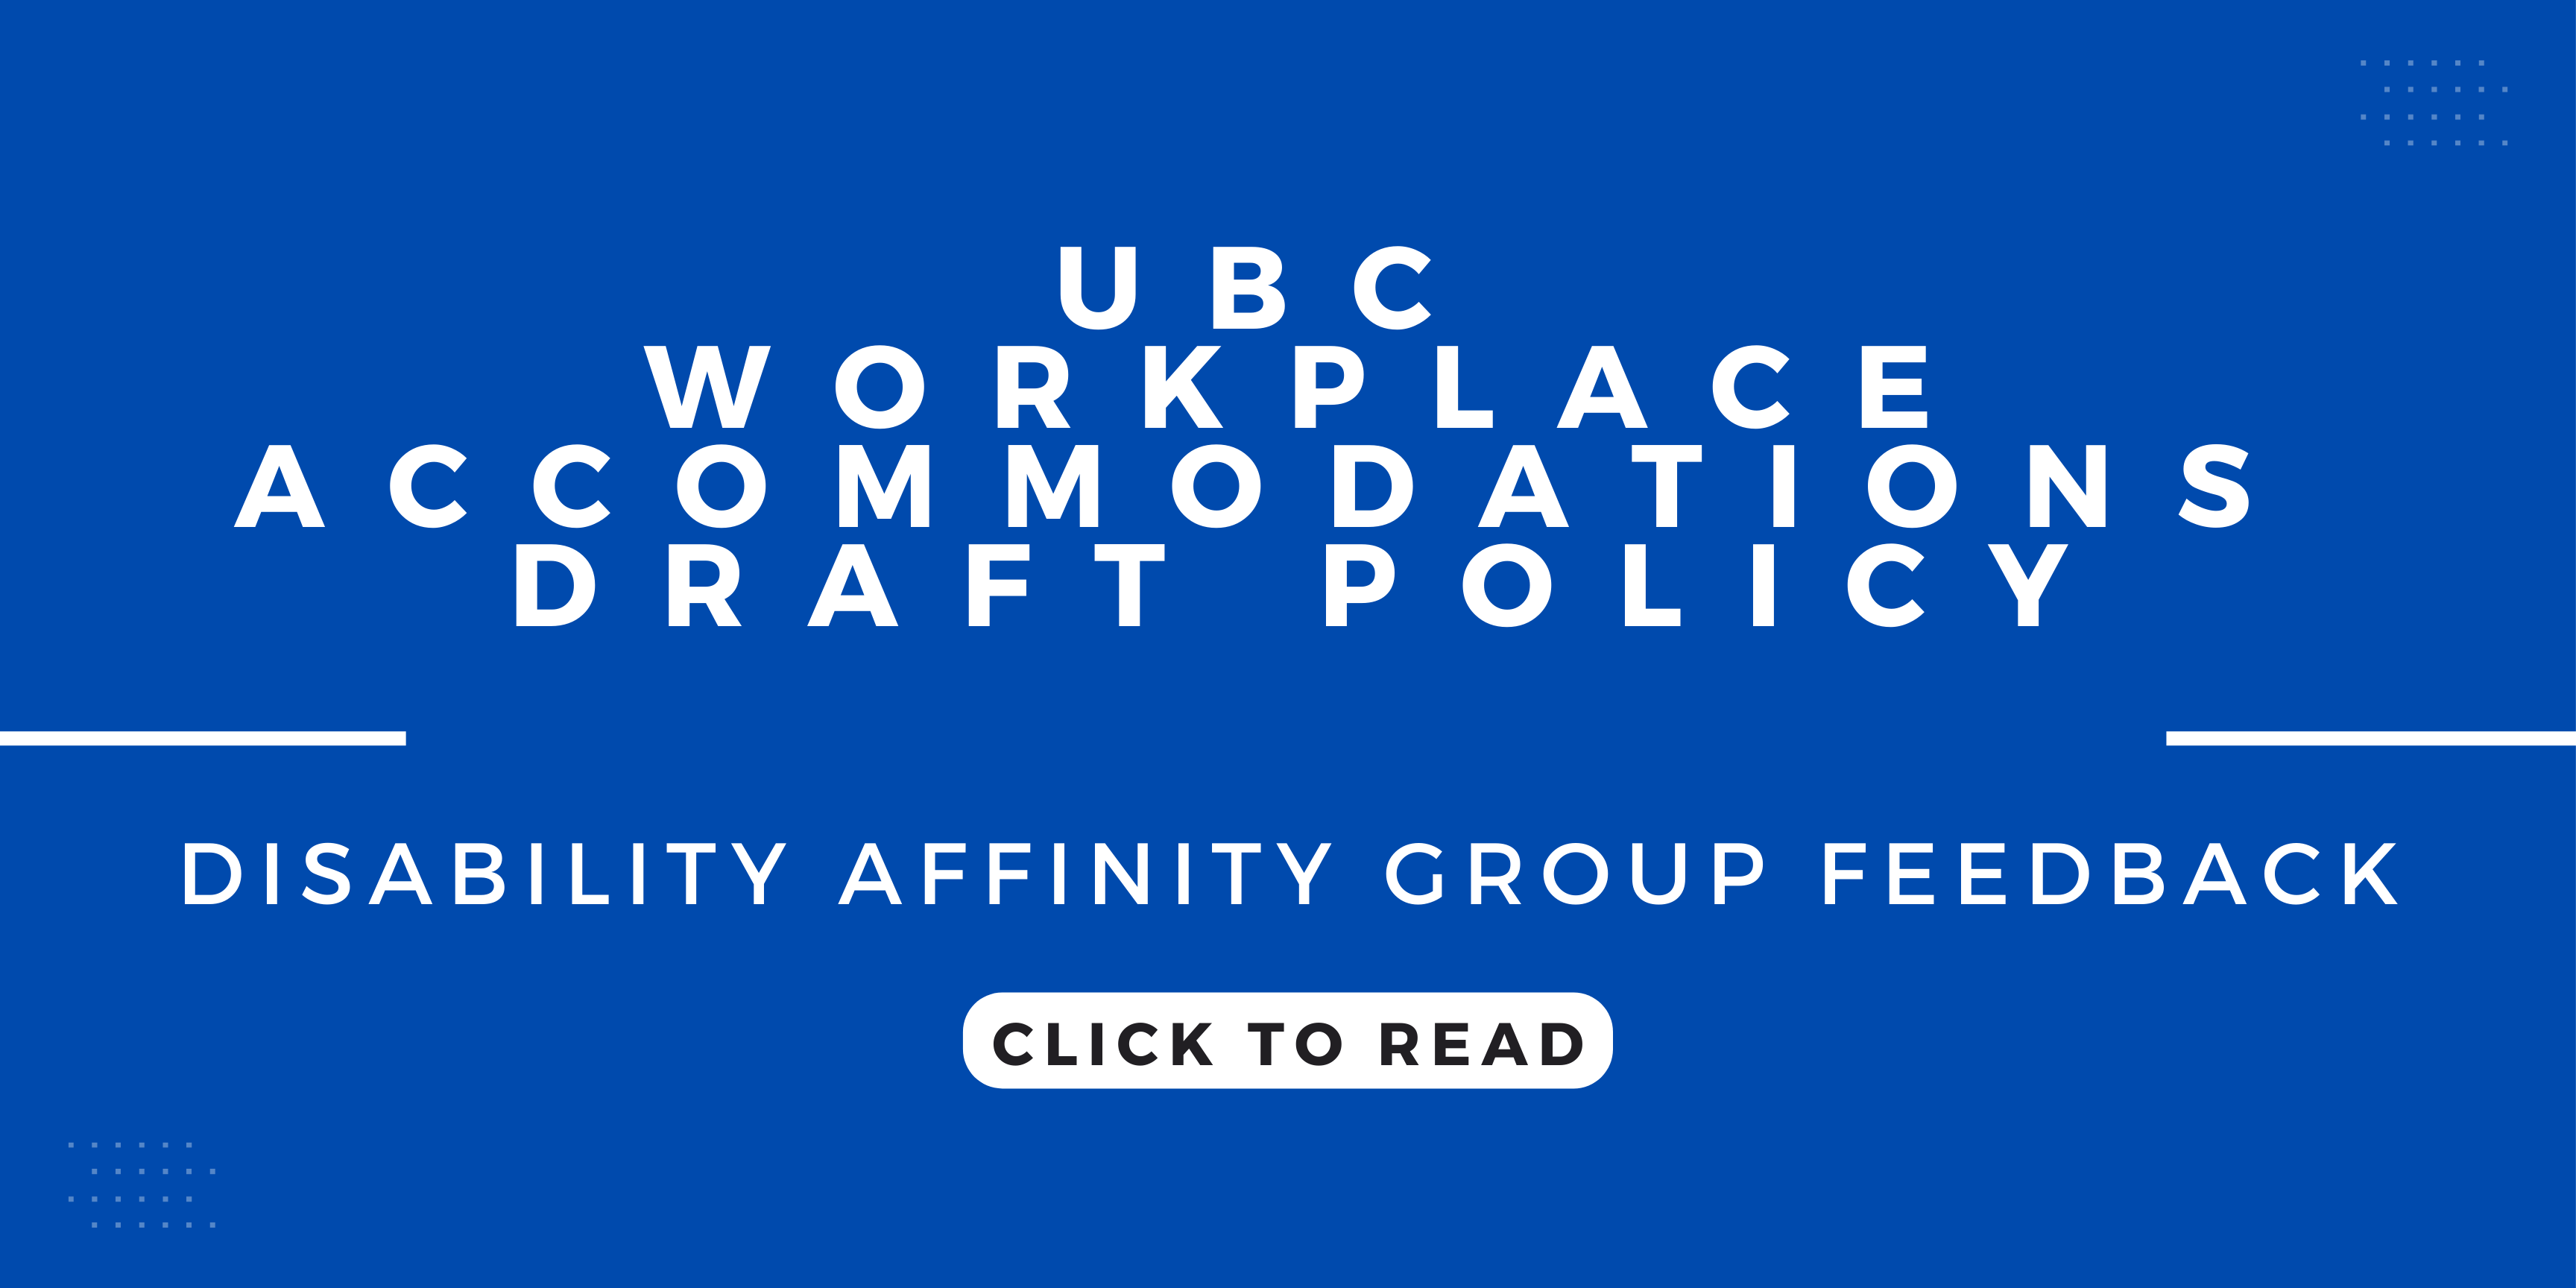 white text on a blue background: "UBC Workplace Accommodations Draft Policy; Disability Affinity Group Feedback. Click To Read"